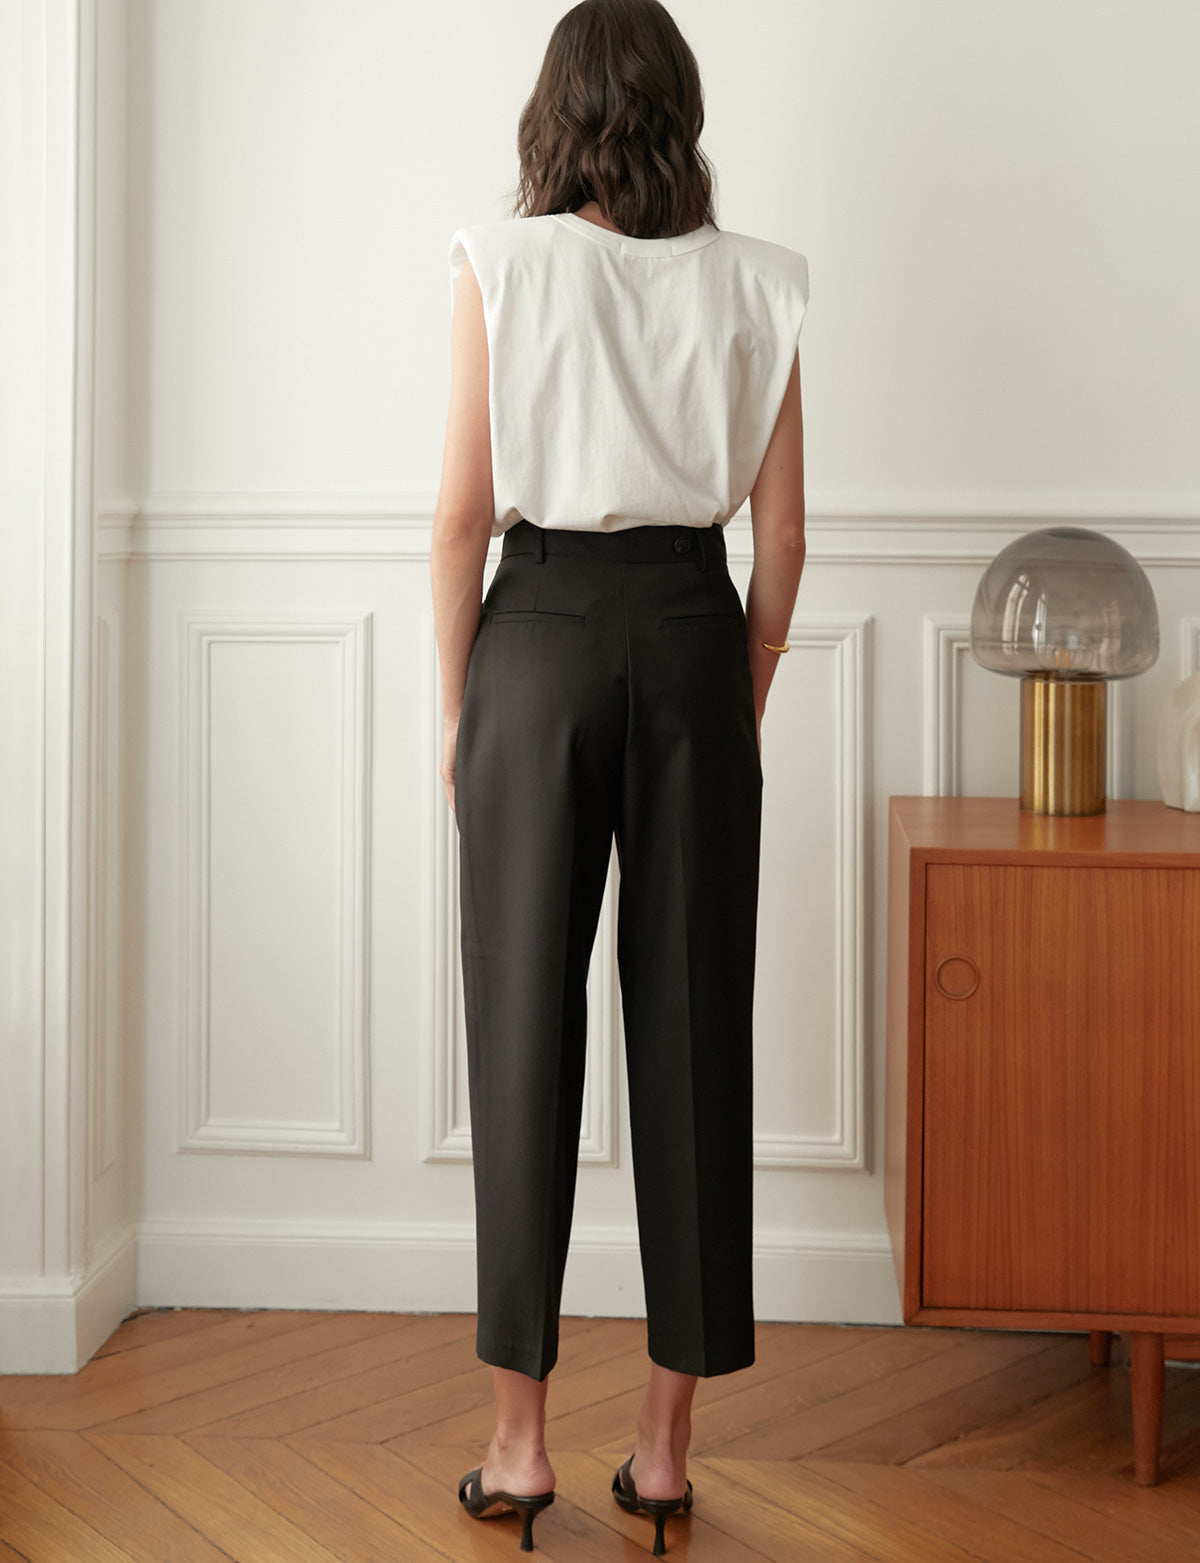 Black Crossover Pant-BESTSELLER  High waisted pants outfit, Everyday  outfit inspiration, Everyday outfits